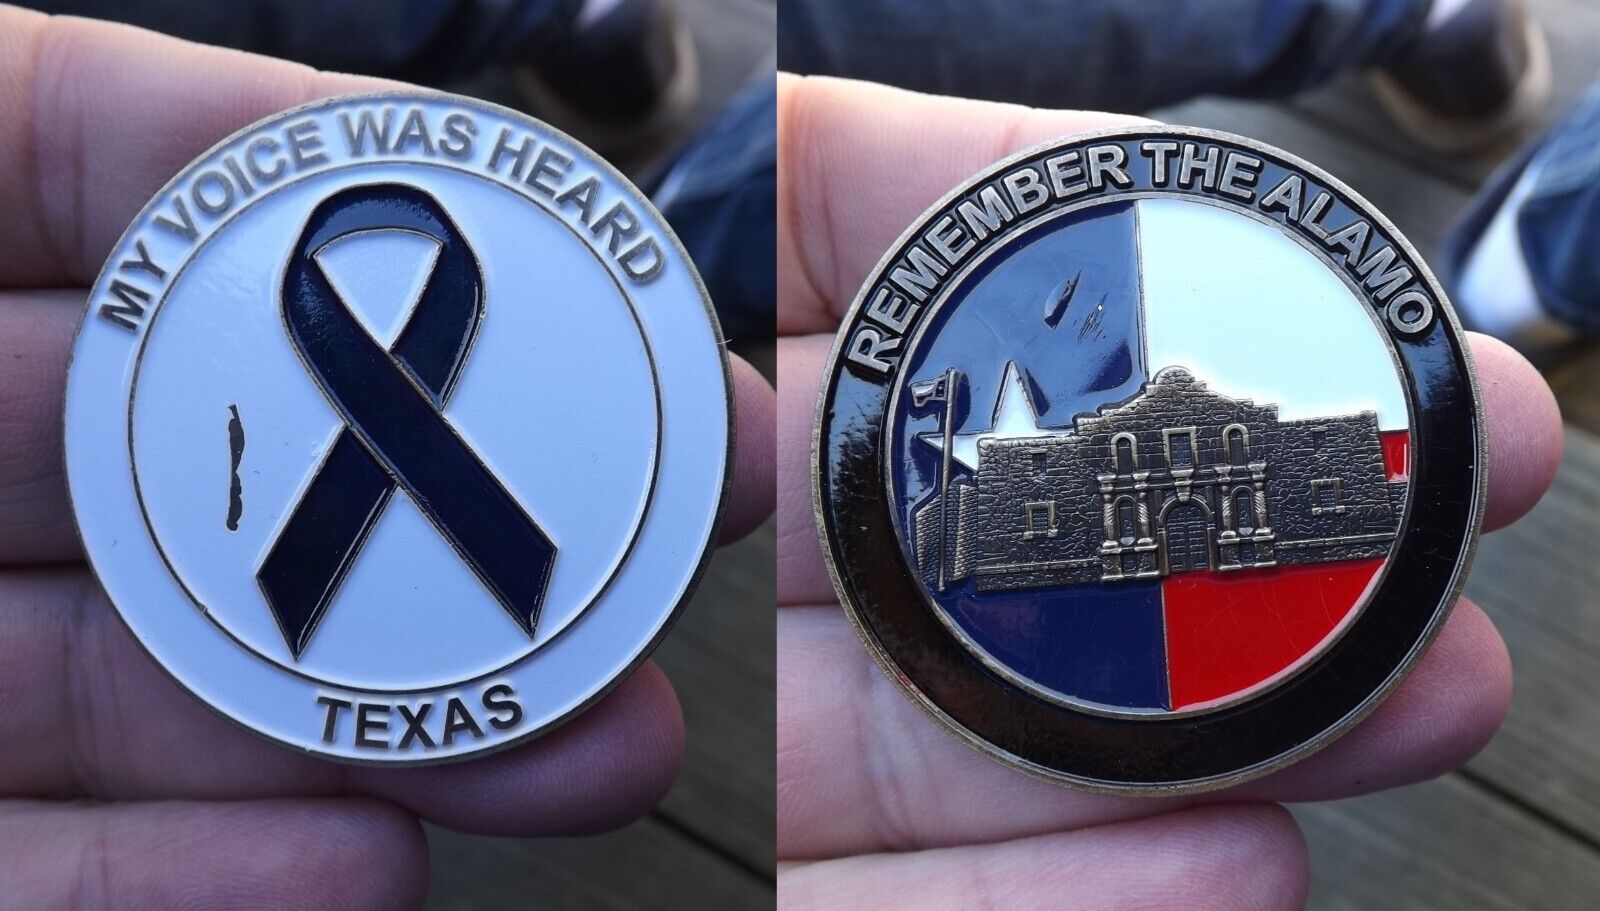 My Voice Was Heard Texas Remember The Alamo Challenge Coin